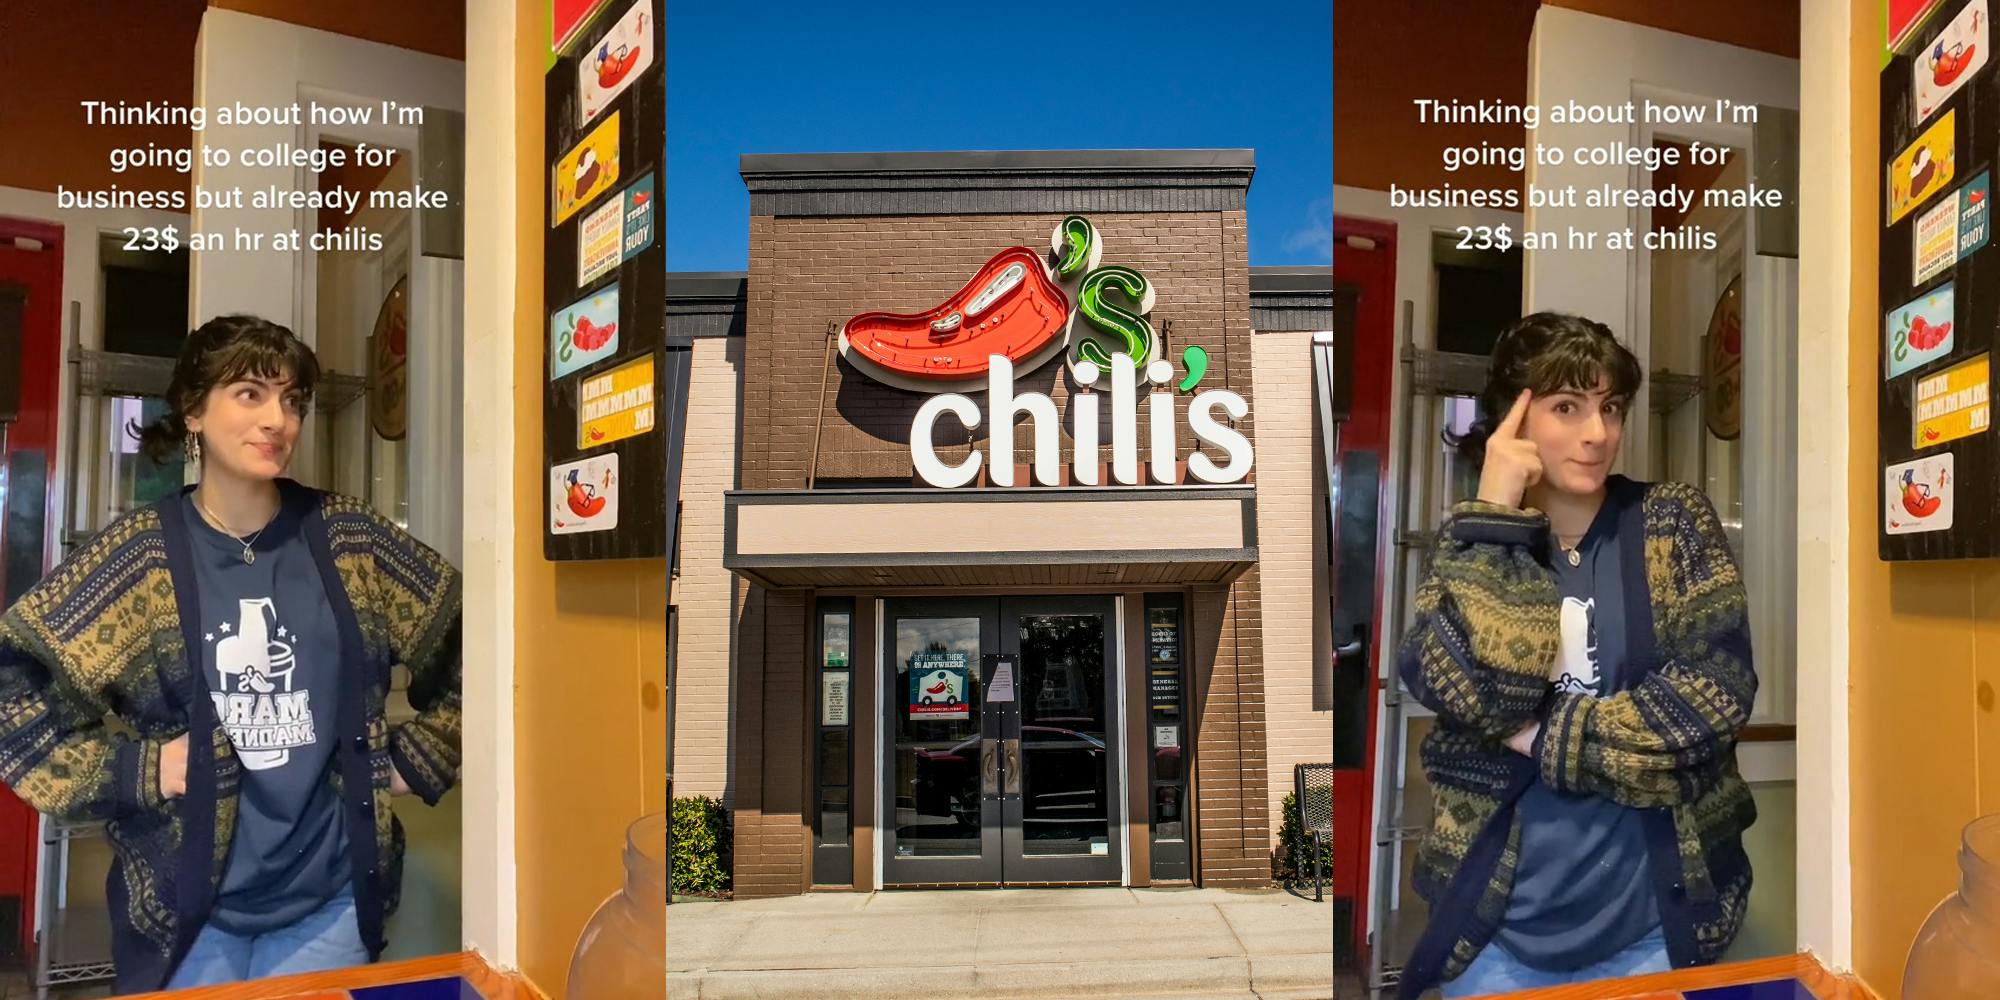 Chili's employee with caption "Thinking about how I'm going to college for business but already make 23$ an hr at chilis" (l) Chilis building with sign and blue sky (c) Chili's employee with caption "Thinking about how I'm going to college for business but already make 23$ an hr at chilis" (r)